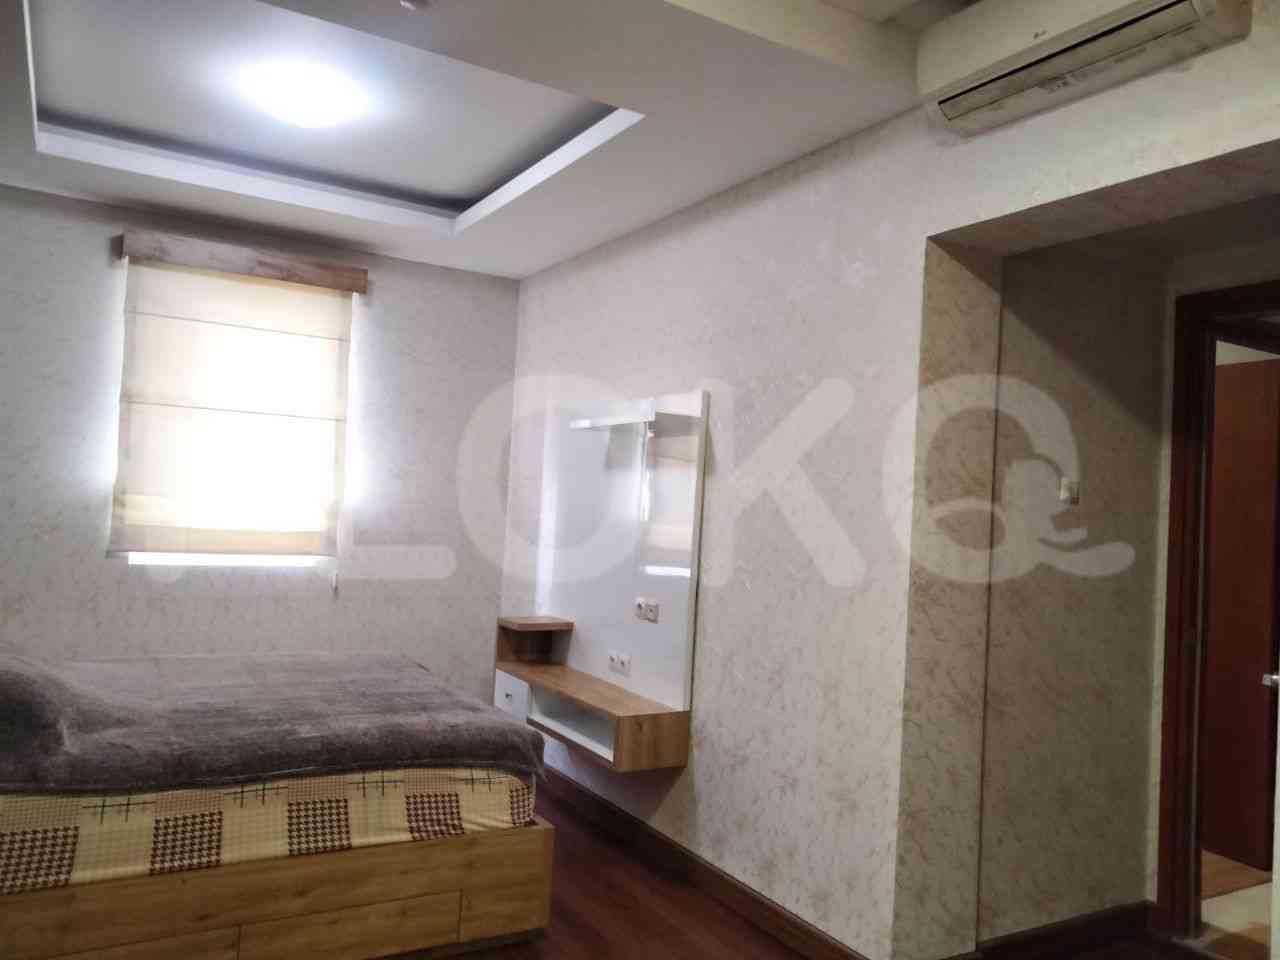 4 Bedroom on 12th Floor for Rent in Grand Palace Kemayoran - fke369 5